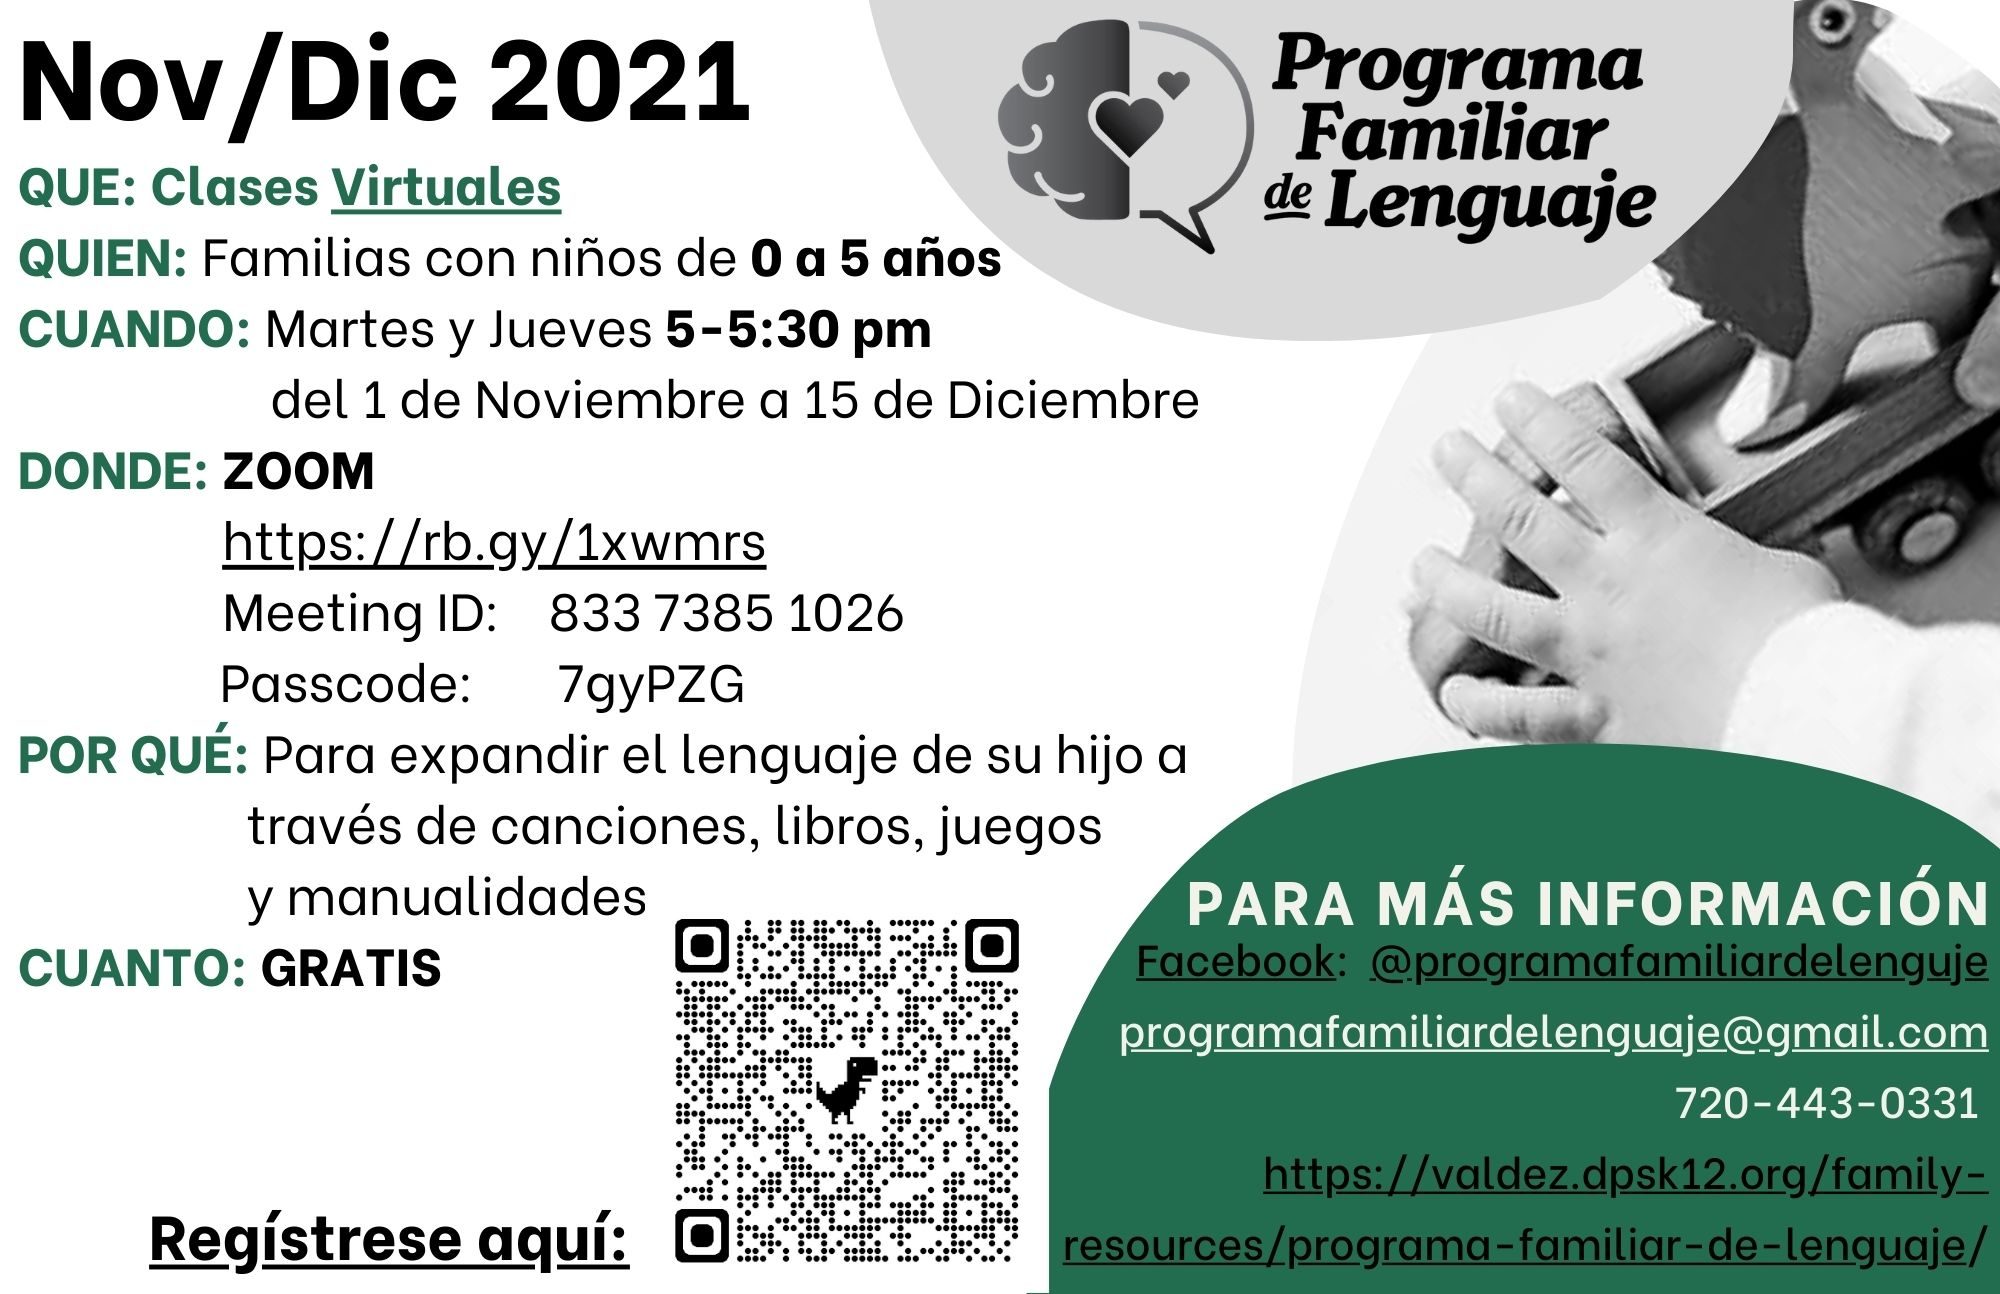 Flyer for the Family Language Program with information for the November/December virtual classes